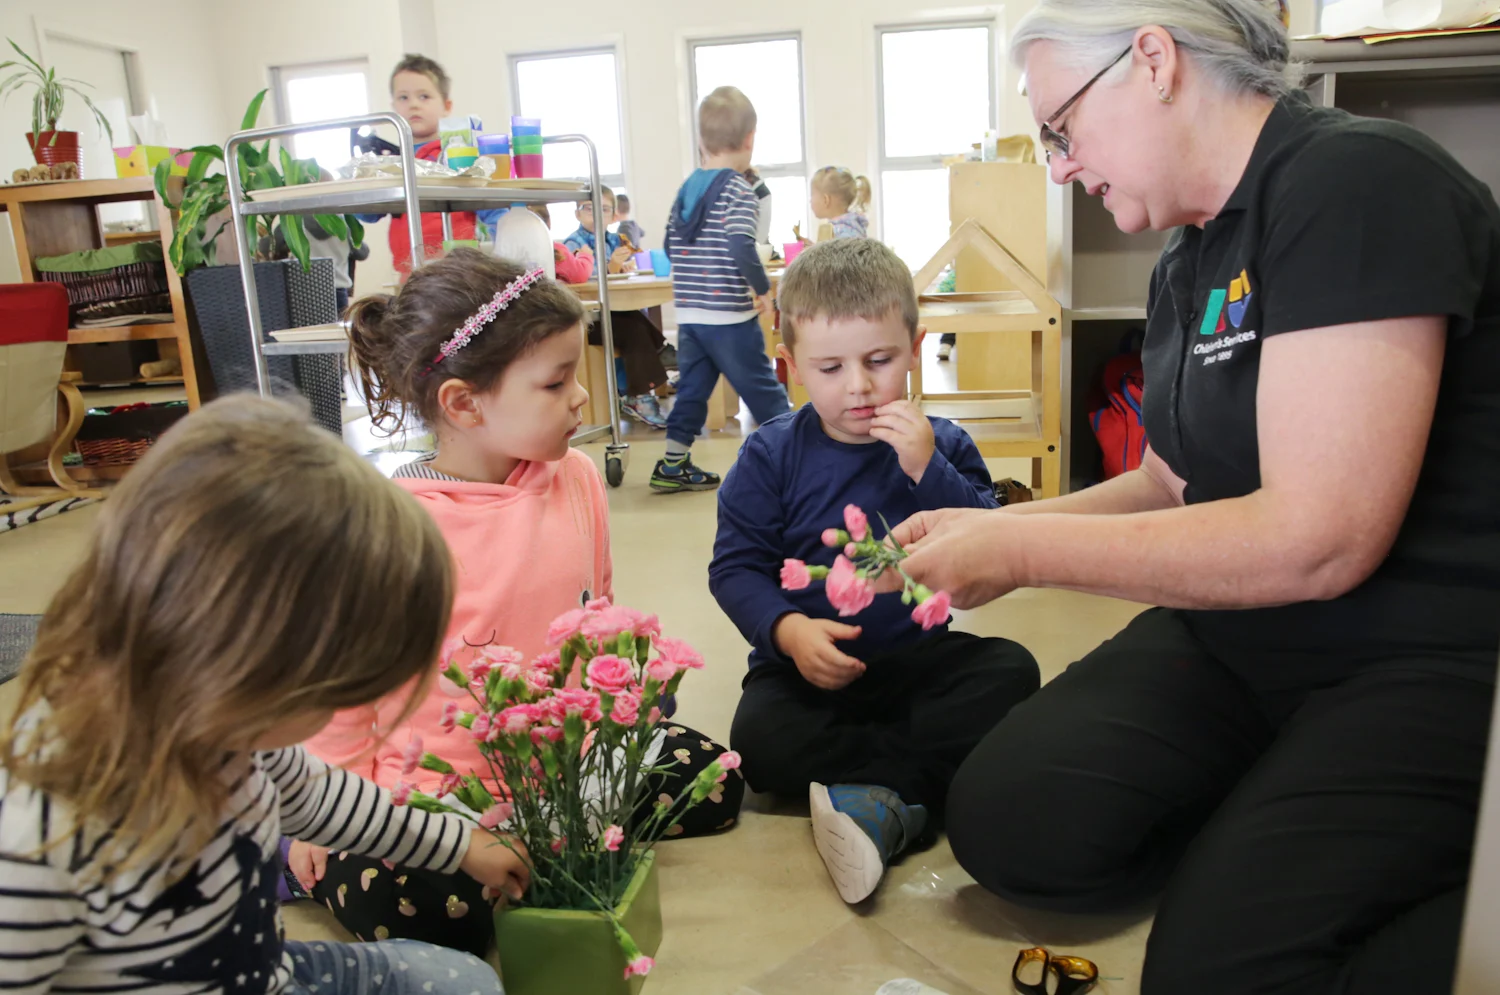 Child care in Queanbeyan